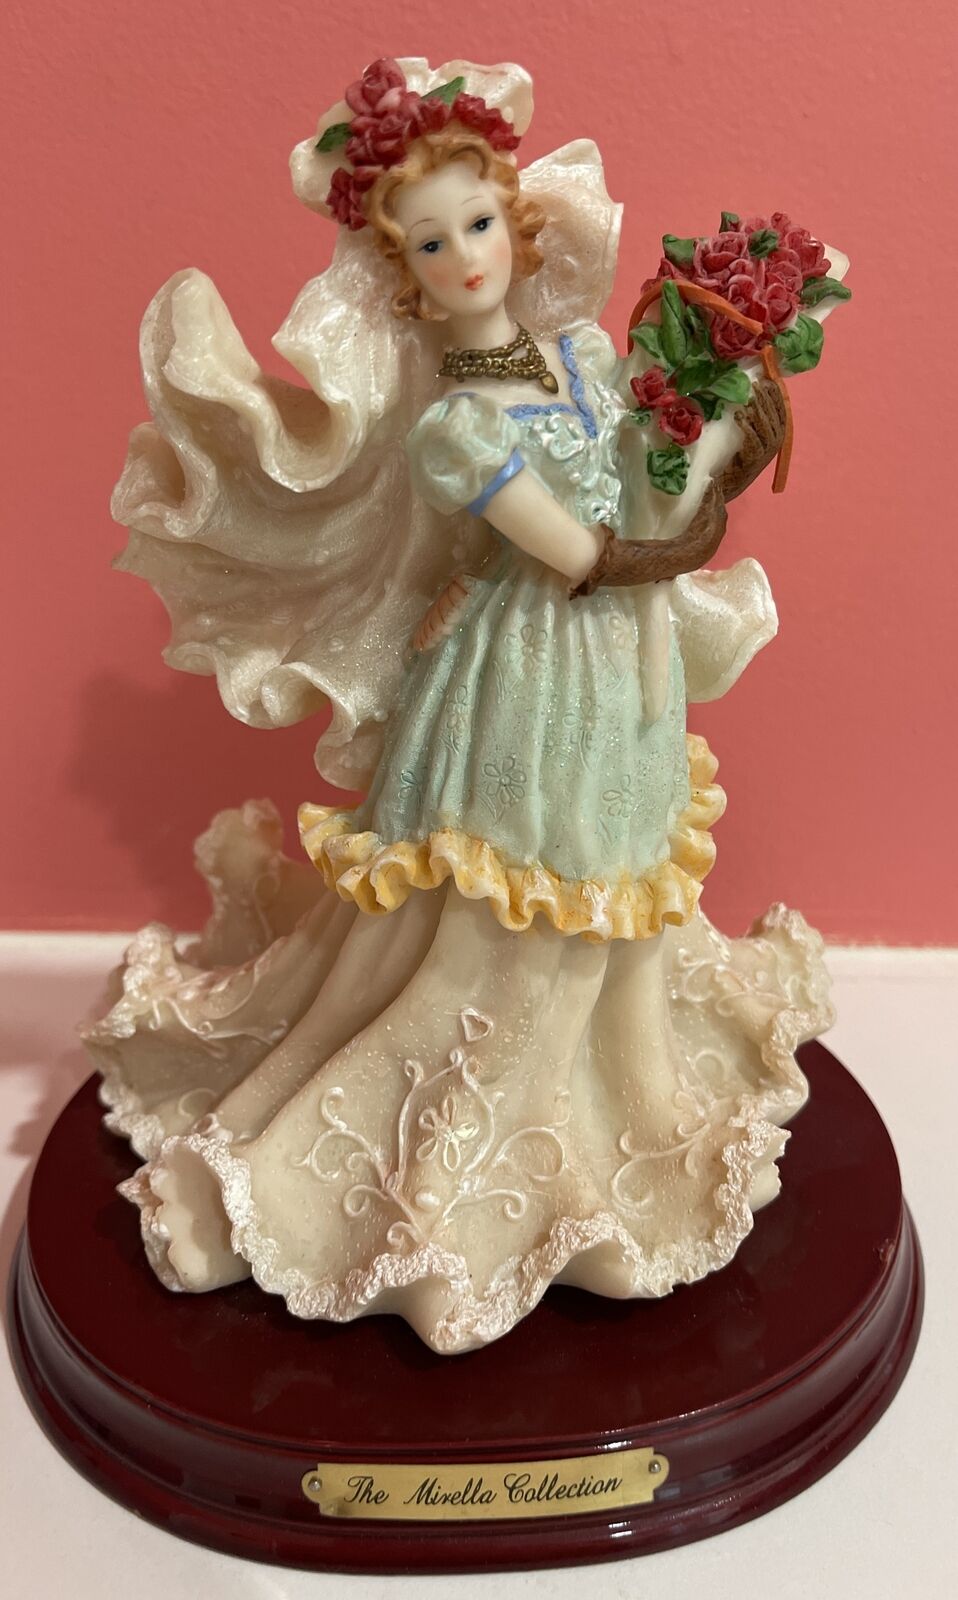 The Mirella Collection Ceramic Figurine Woman With Roses 🌺🌺🌺🌹🌹